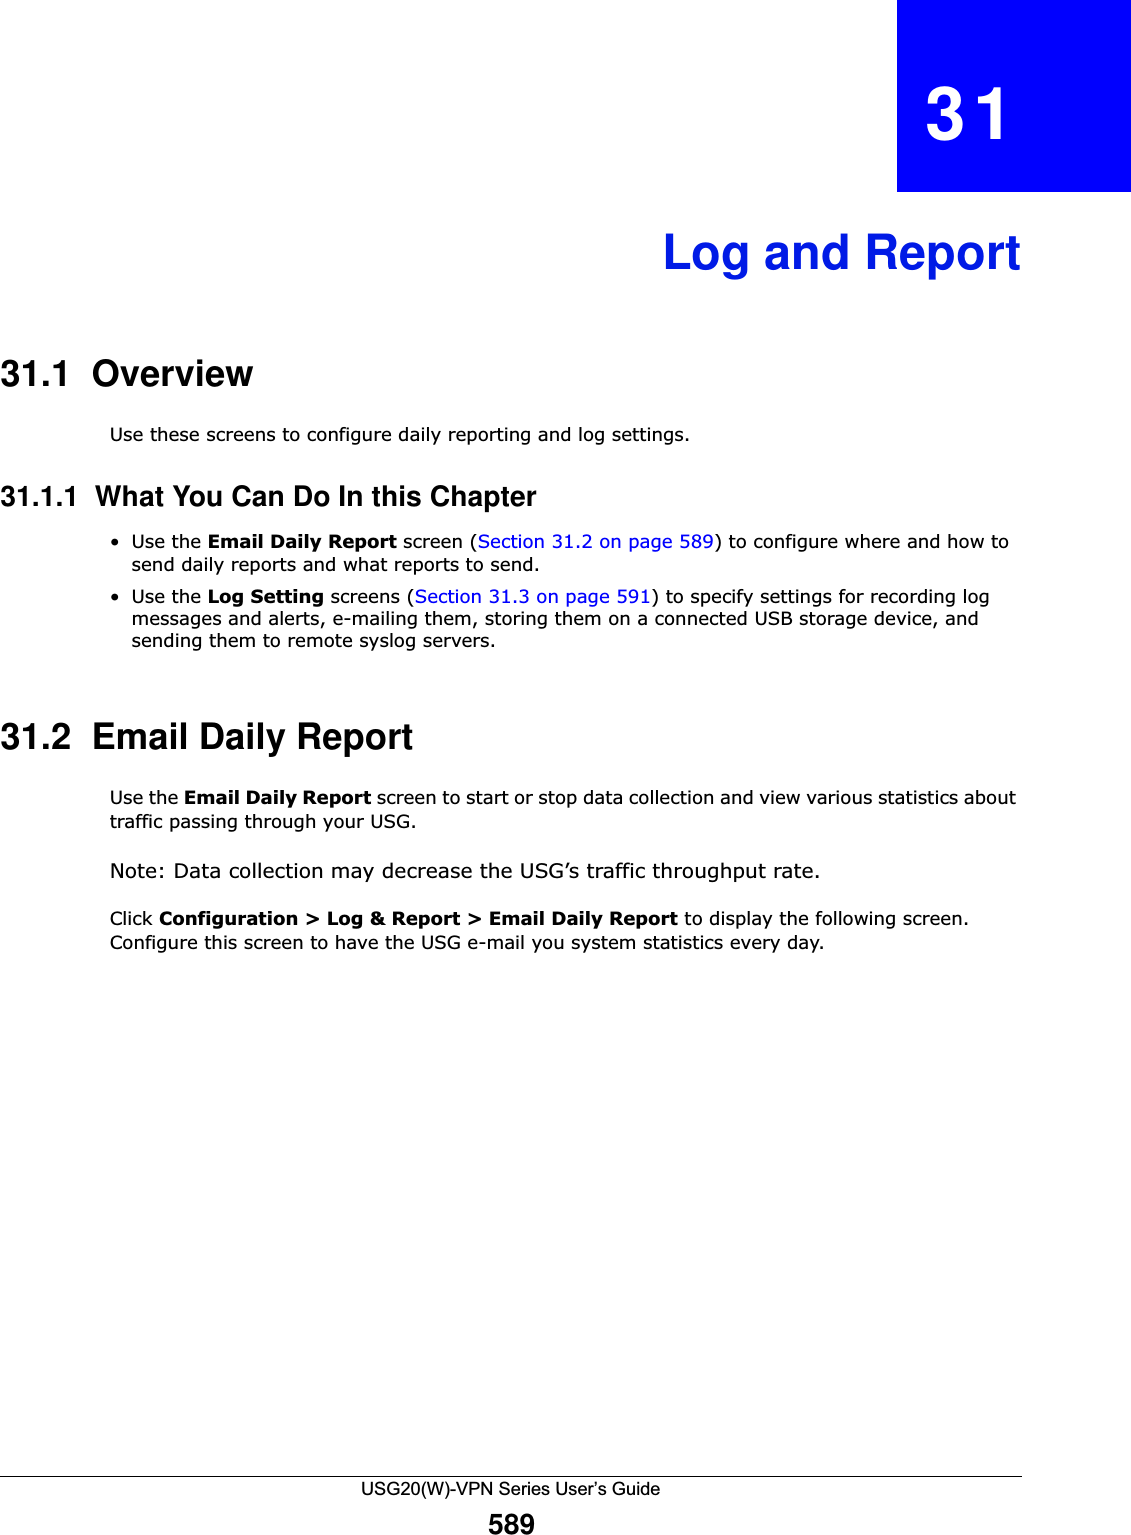 USG20(W)-VPN Series User’s Guide589CHAPTER   31Log and Report31.1  OverviewUse these screens to configure daily reporting and log settings. 31.1.1  What You Can Do In this Chapter•Use the Email Daily Report screen (Section 31.2 on page 589) to configure where and how to send daily reports and what reports to send.•Use the Log Setting screens (Section 31.3 on page 591) to specify settings for recording log messages and alerts, e-mailing them, storing them on a connected USB storage device, and sending them to remote syslog servers.31.2  Email Daily ReportUse the Email Daily Report screen to start or stop data collection and view various statistics about traffic passing through your USG. Note: Data collection may decrease the USG’s traffic throughput rate.Click Configuration &gt; Log &amp; Report &gt; Email Daily Report to display the following screen. Configure this screen to have the USG e-mail you system statistics every day. 